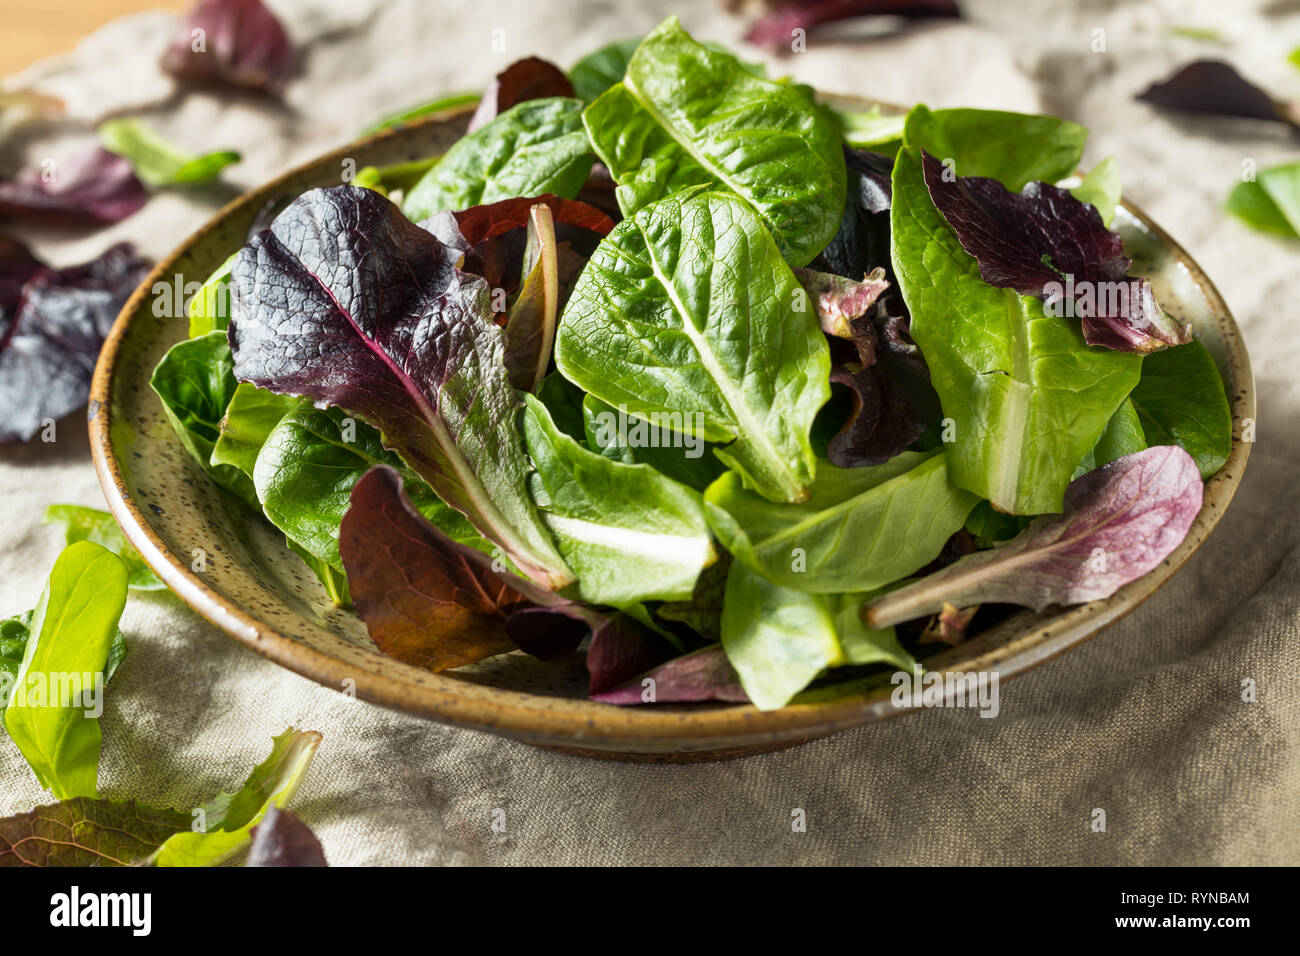 Raw Green Organic Baby Romaine Lettuce in a Bowl Stock Photo